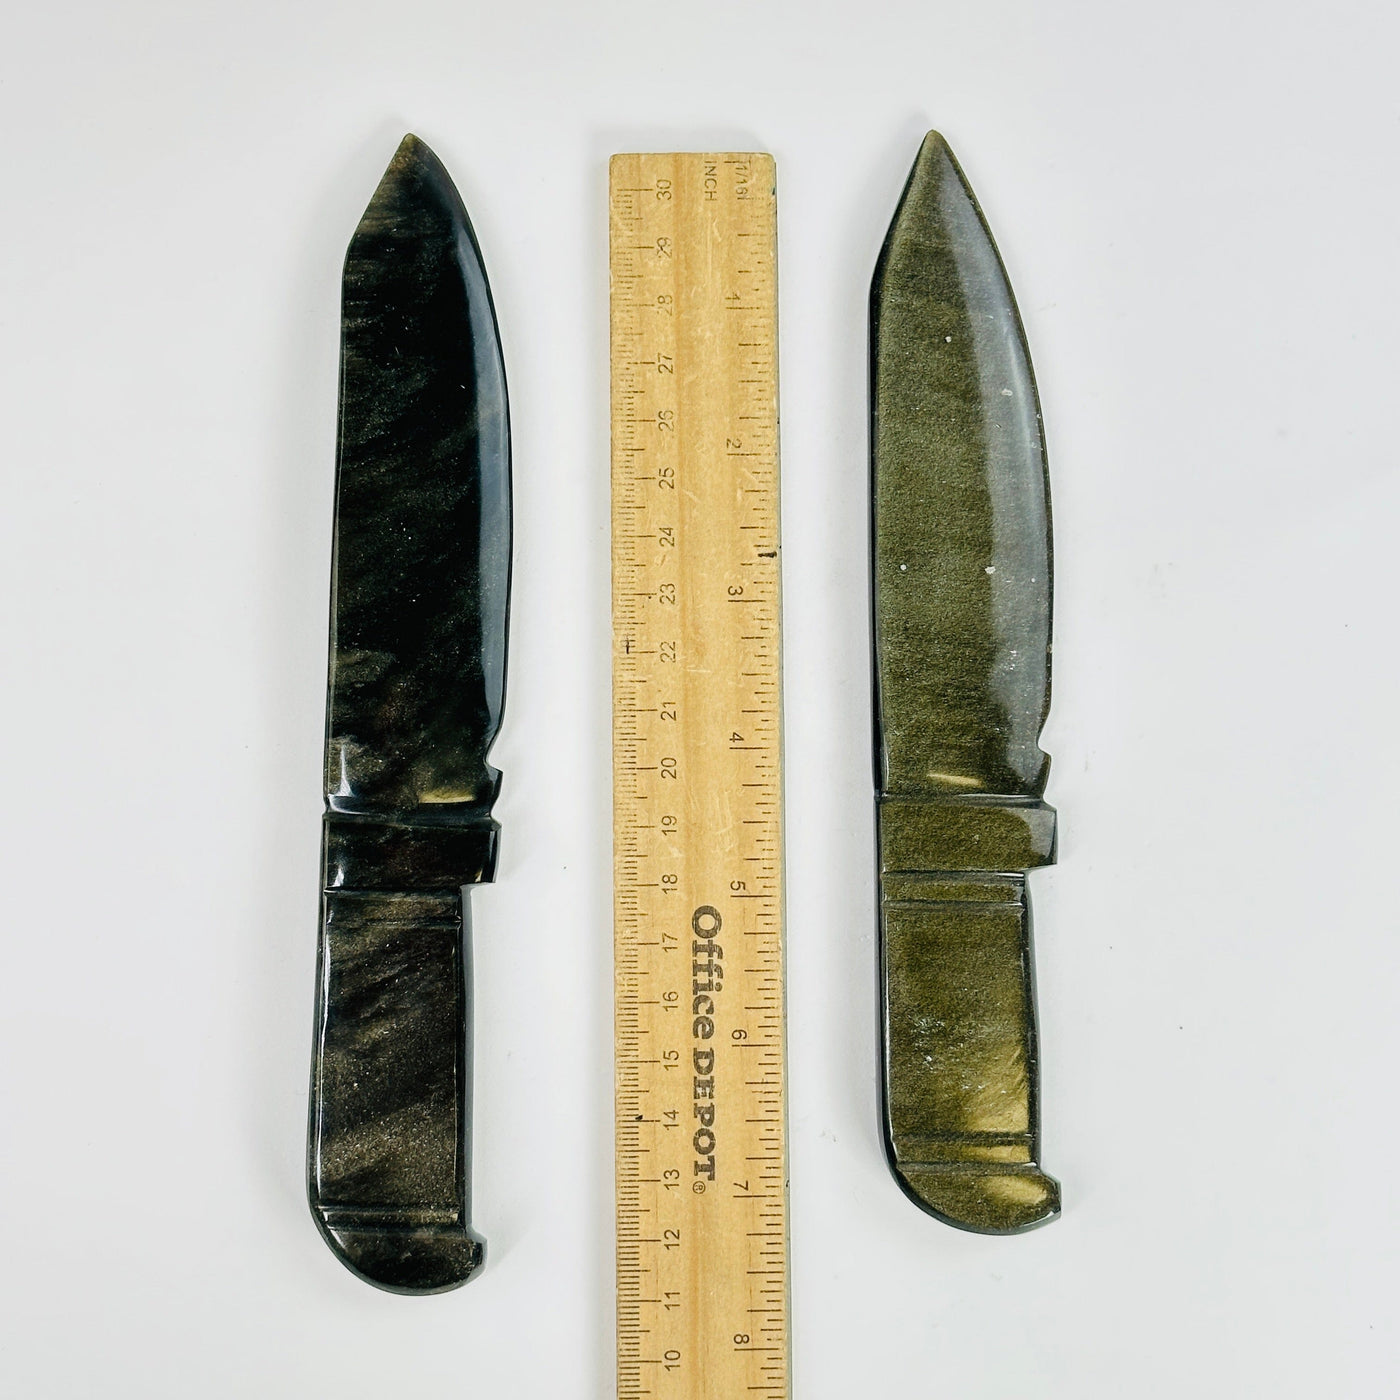 obsidian knives next to a ruler for size reference